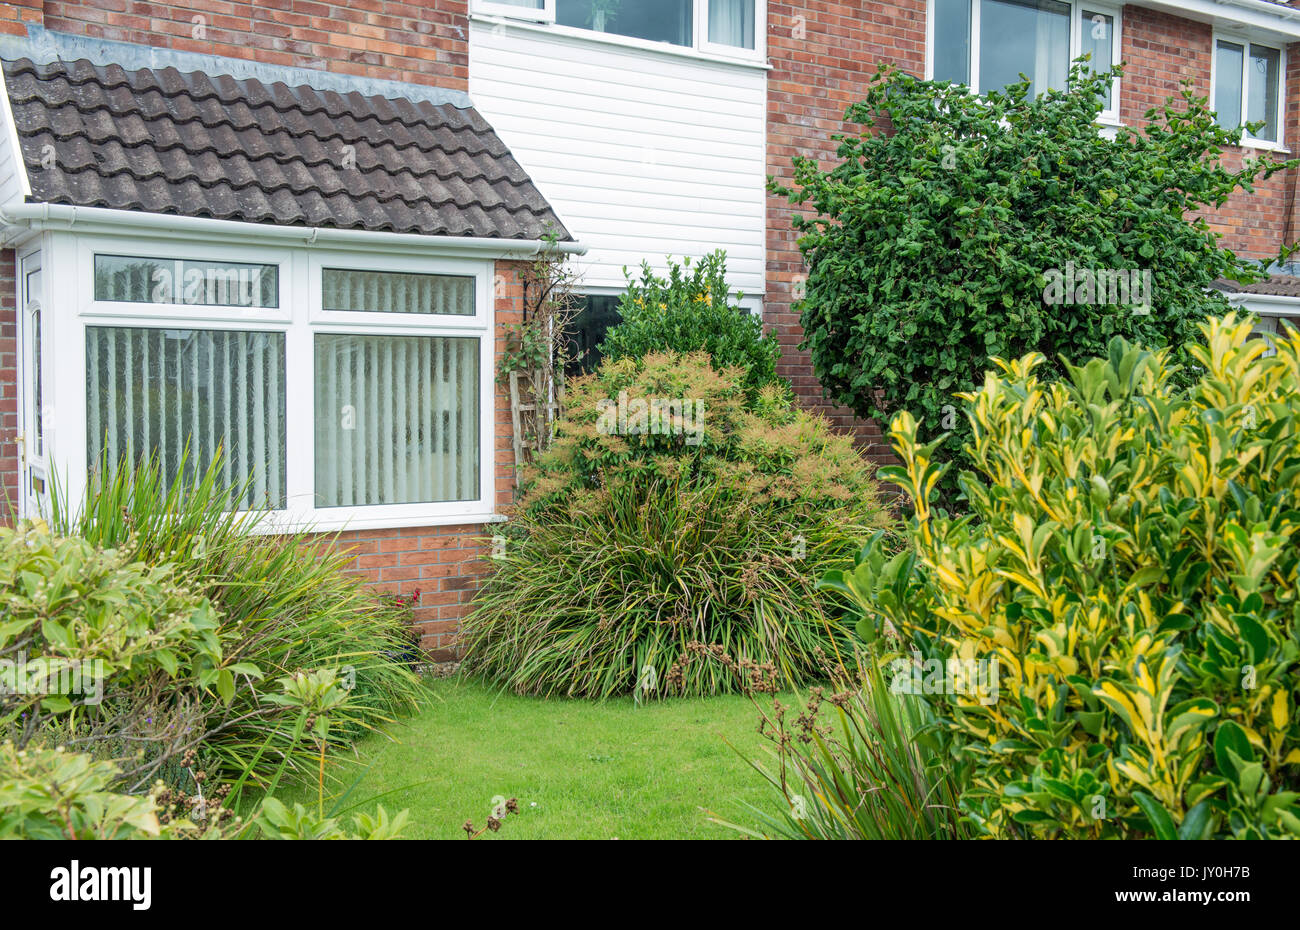 Front garden of a typical suburban house in the UK, located near Cardiff, south Wales Stock Photo